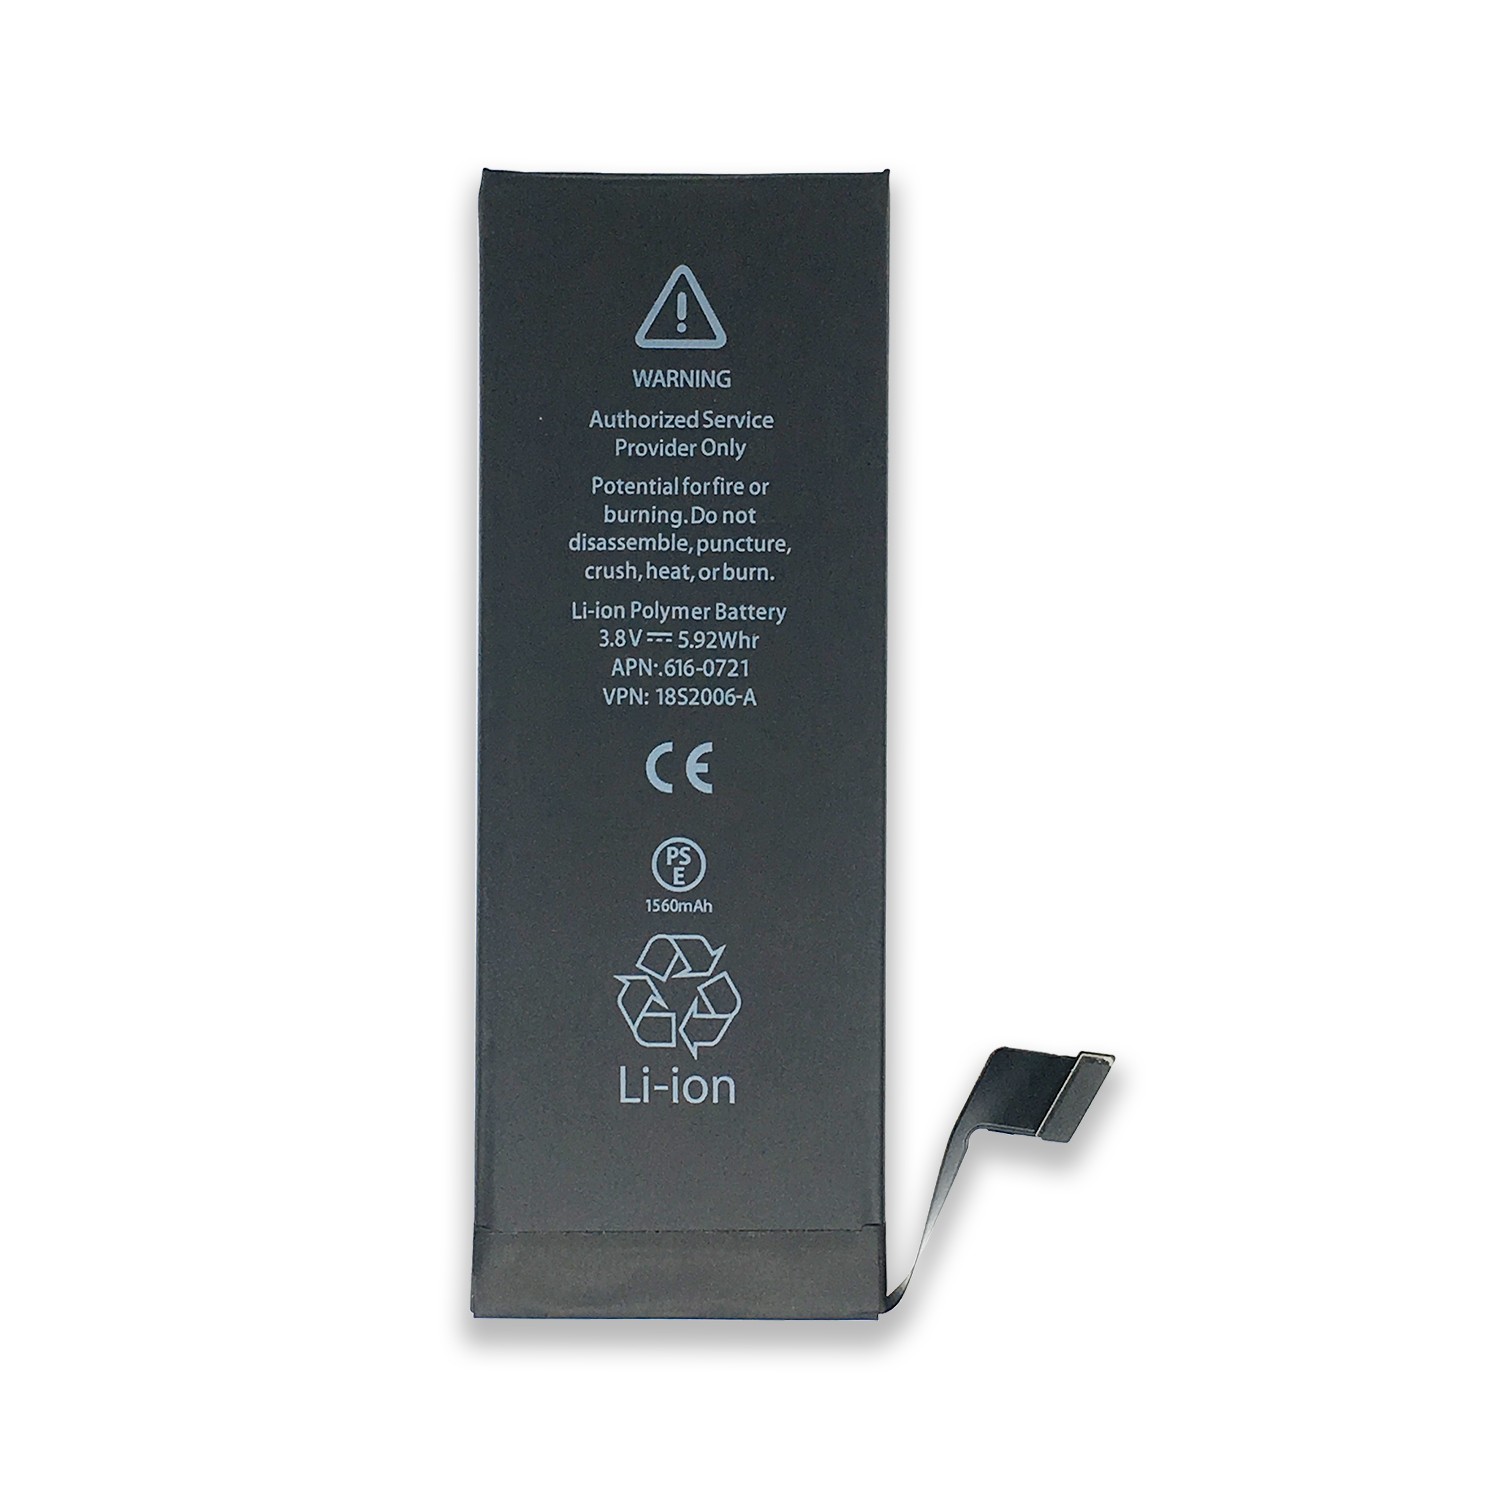 Hot sale high capacity replacement digital phone battery for iPhone 5S